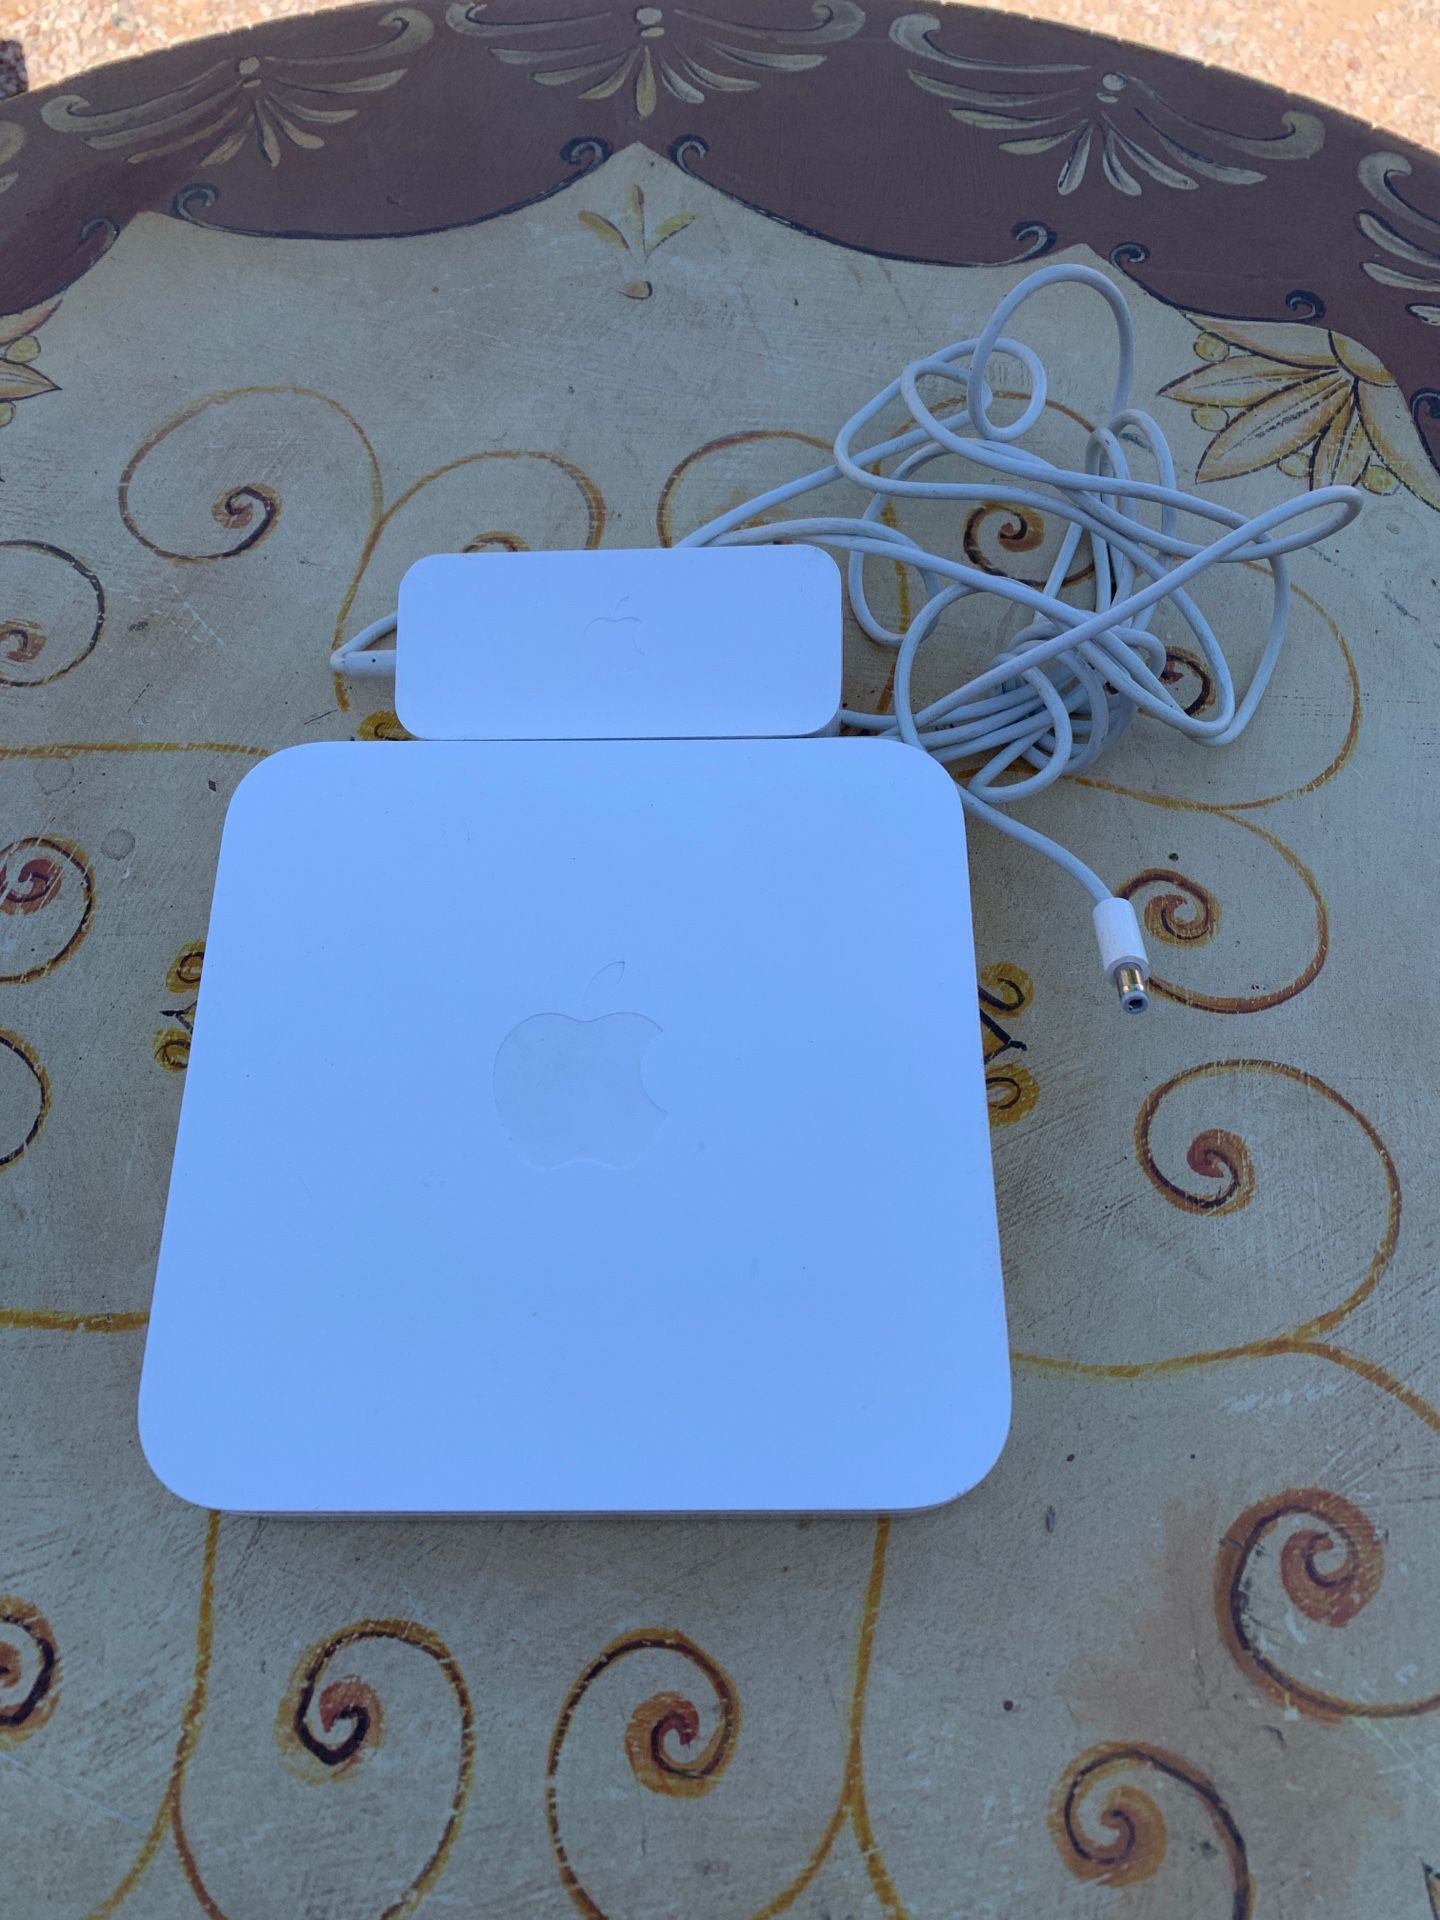 Airport extreme base station